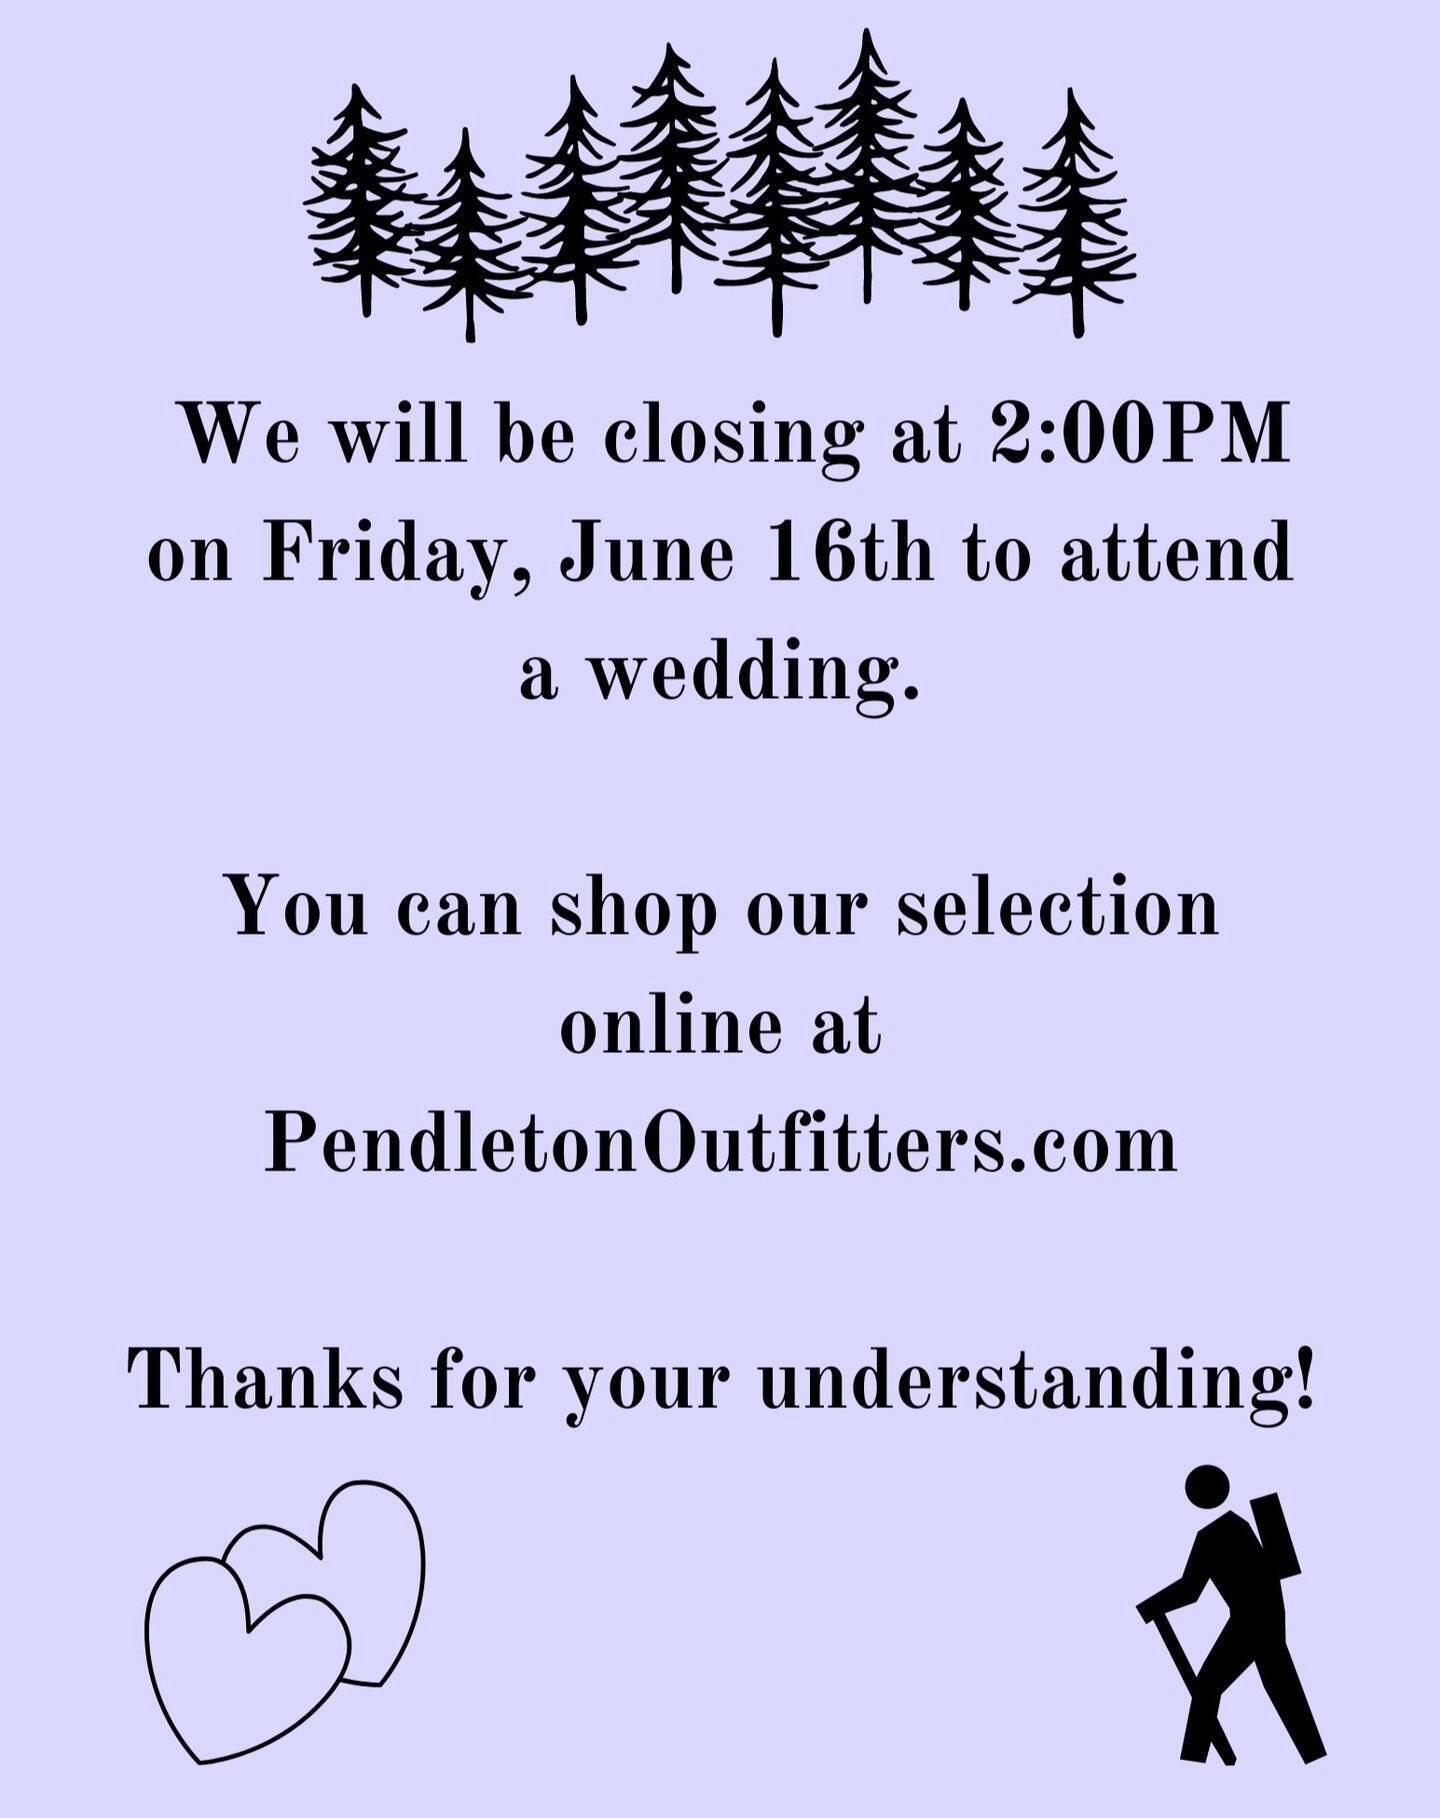 It's wedding season! We will be closing at 2:00pm on Friday, June 16th, but will be open again on Saturday the 17th!
Thanks for your understanding.